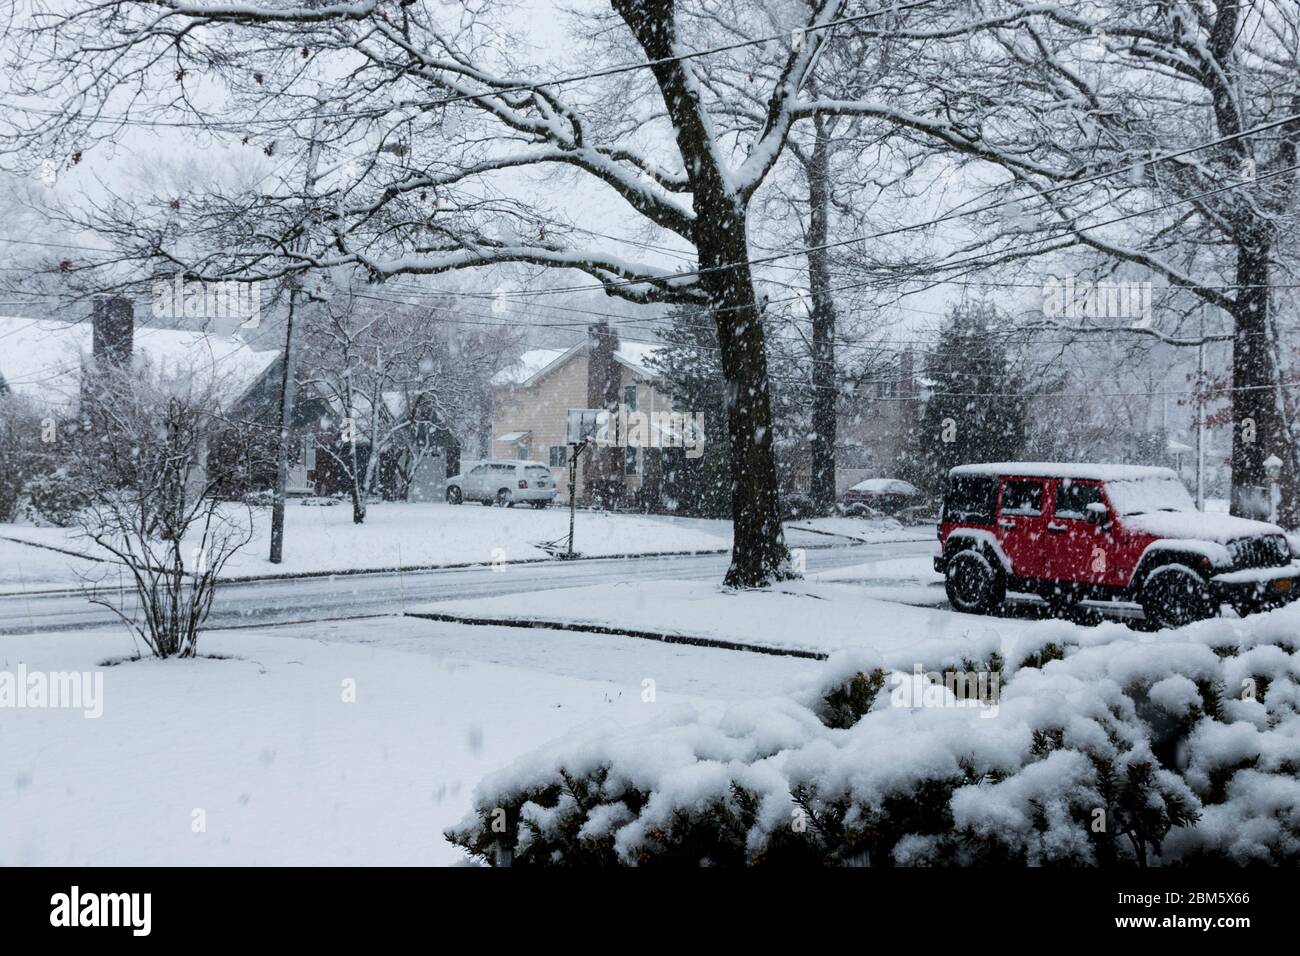 Large snow flakes falling from the sky during an early spring snow storm in a long island neighborhood. Stock Photo